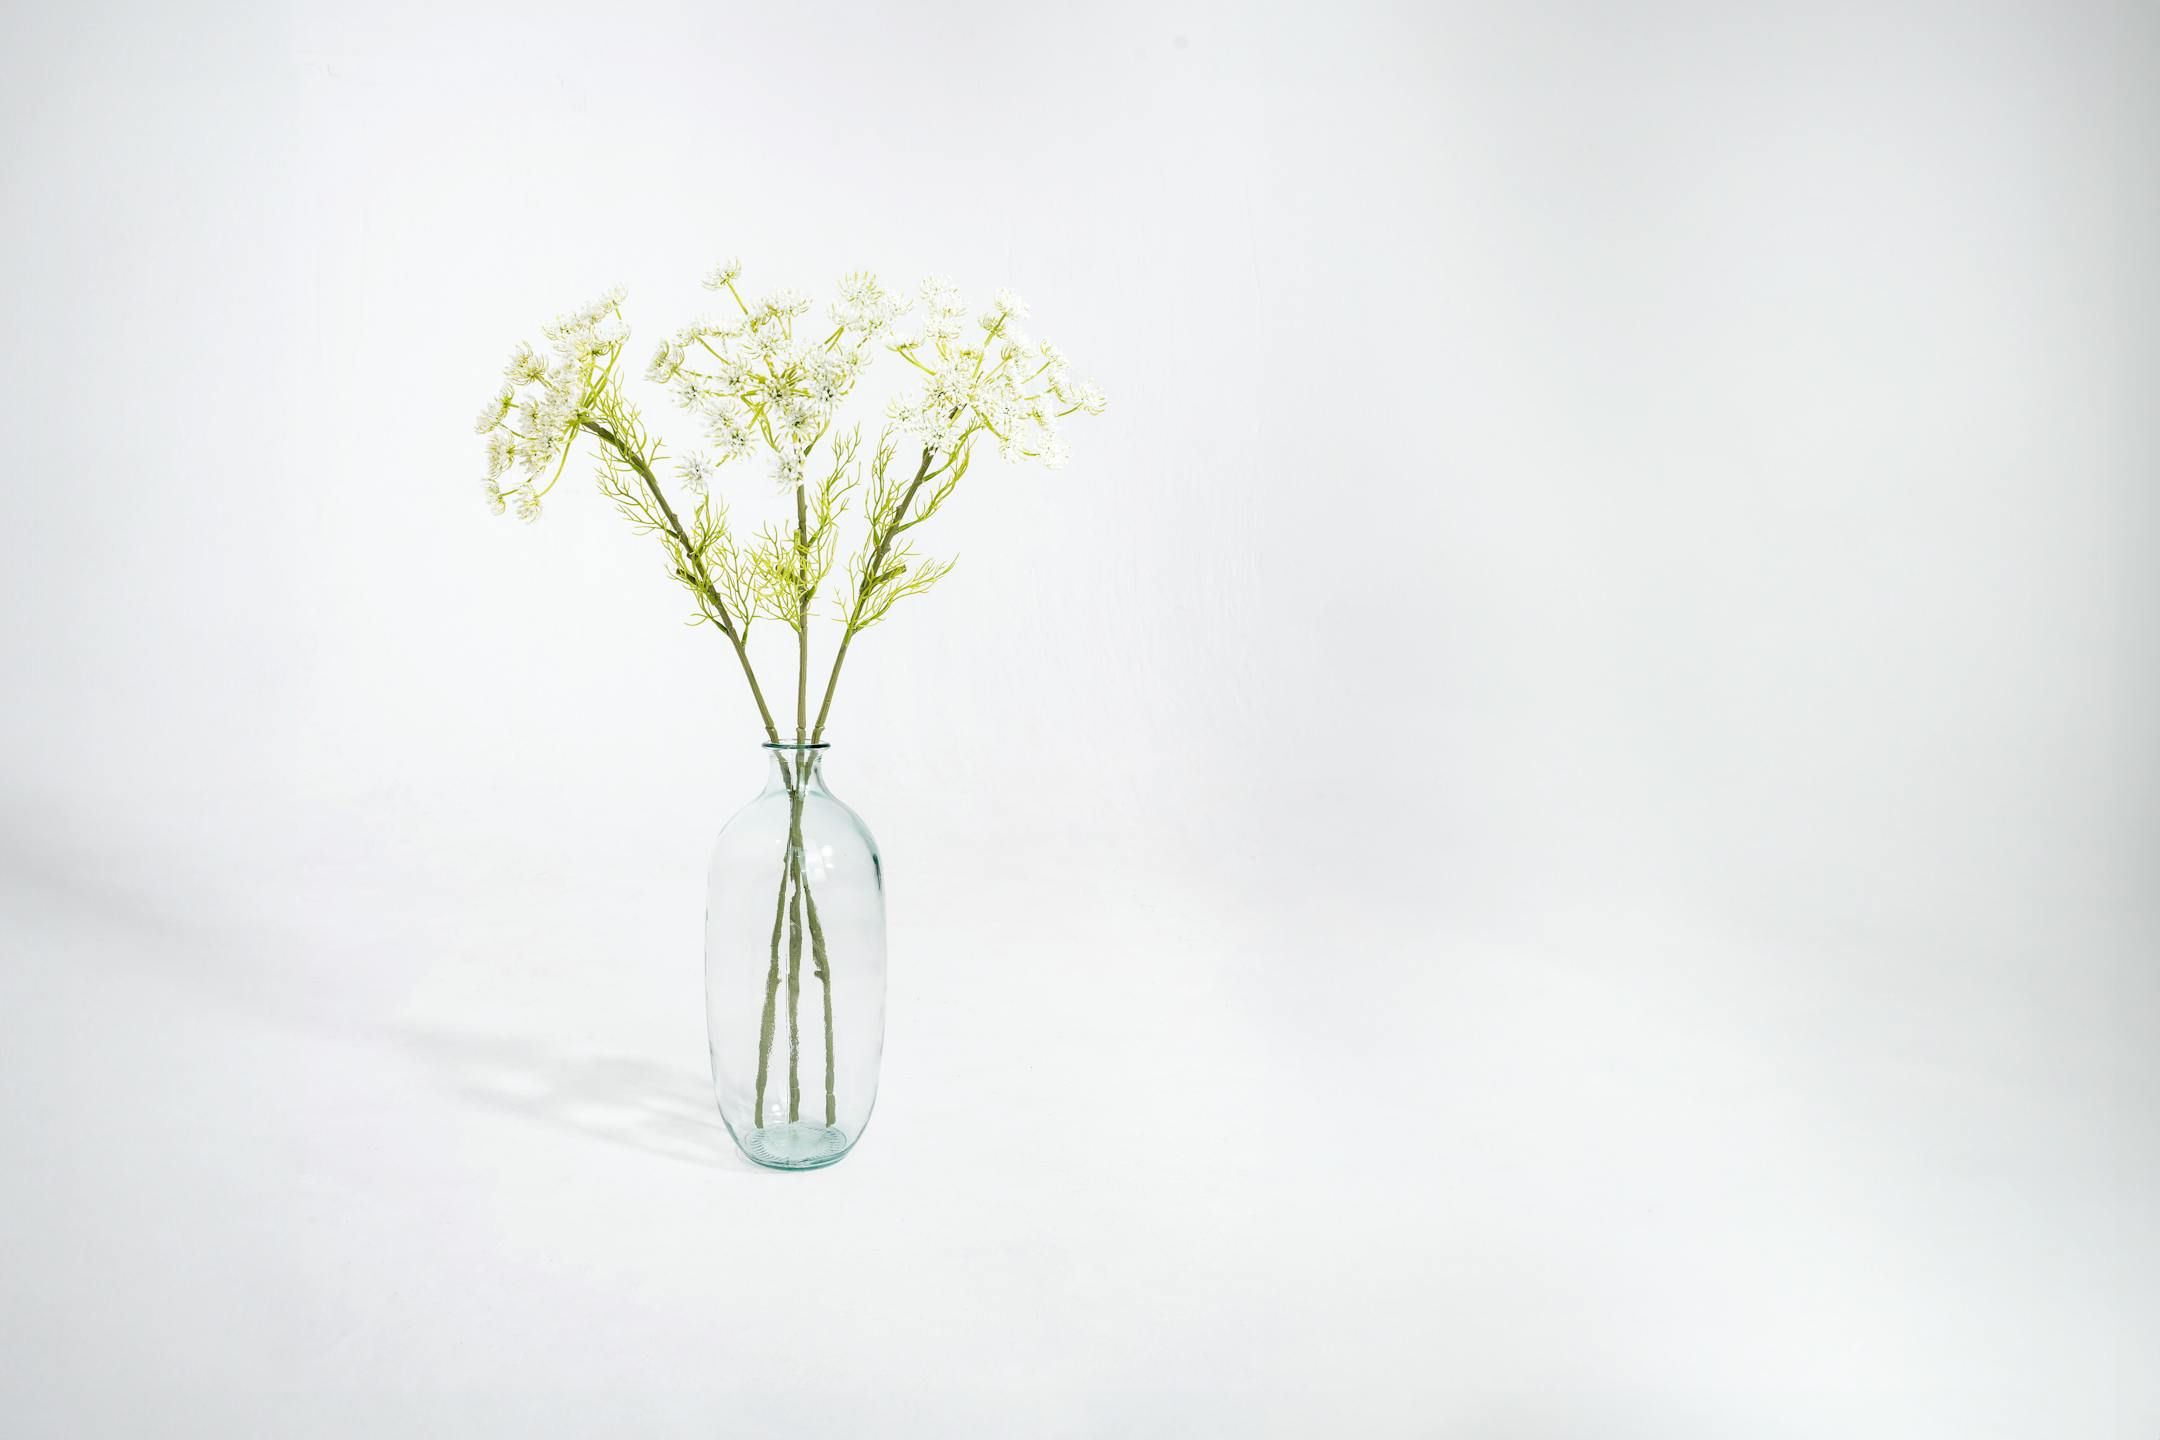 Three artificial Queen Anne's lace stems in glass vase